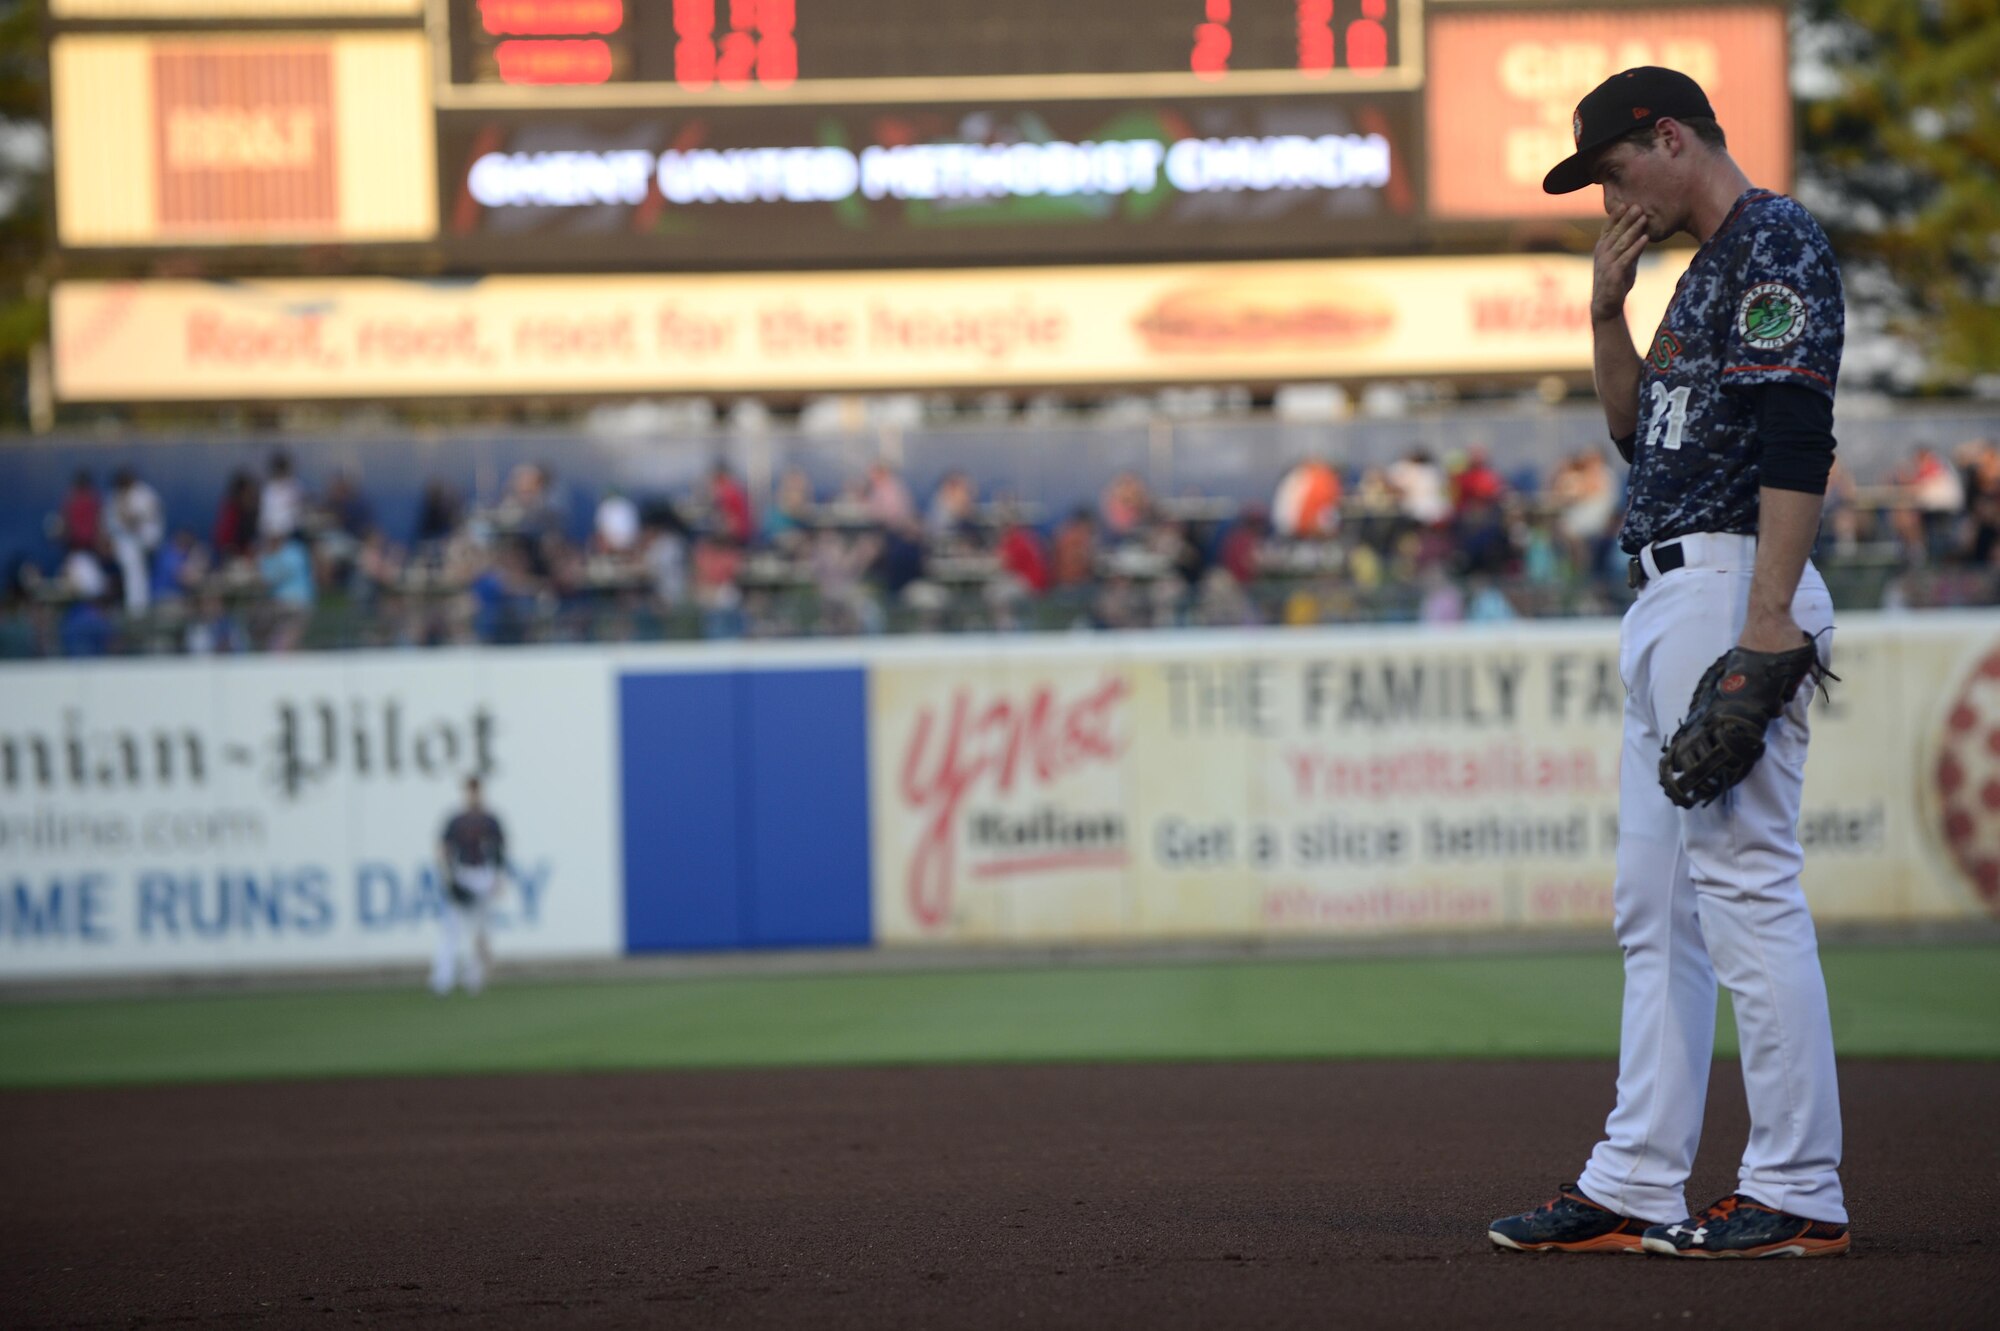 Trey Mancini, Norfolk Tides first baseman, waits for the Norfolk Tides Air Force Appreciation Night baseball game to begin in Norfolk, Va., July 23, 2016. The Tides wore digital camouflage print uniforms during the game against the Toledo Mud Hens to honor service members from all branches of the U.S. Armed Forces. (U.S. Air Force photo by Airman 1st Class Kaylee Dubois)